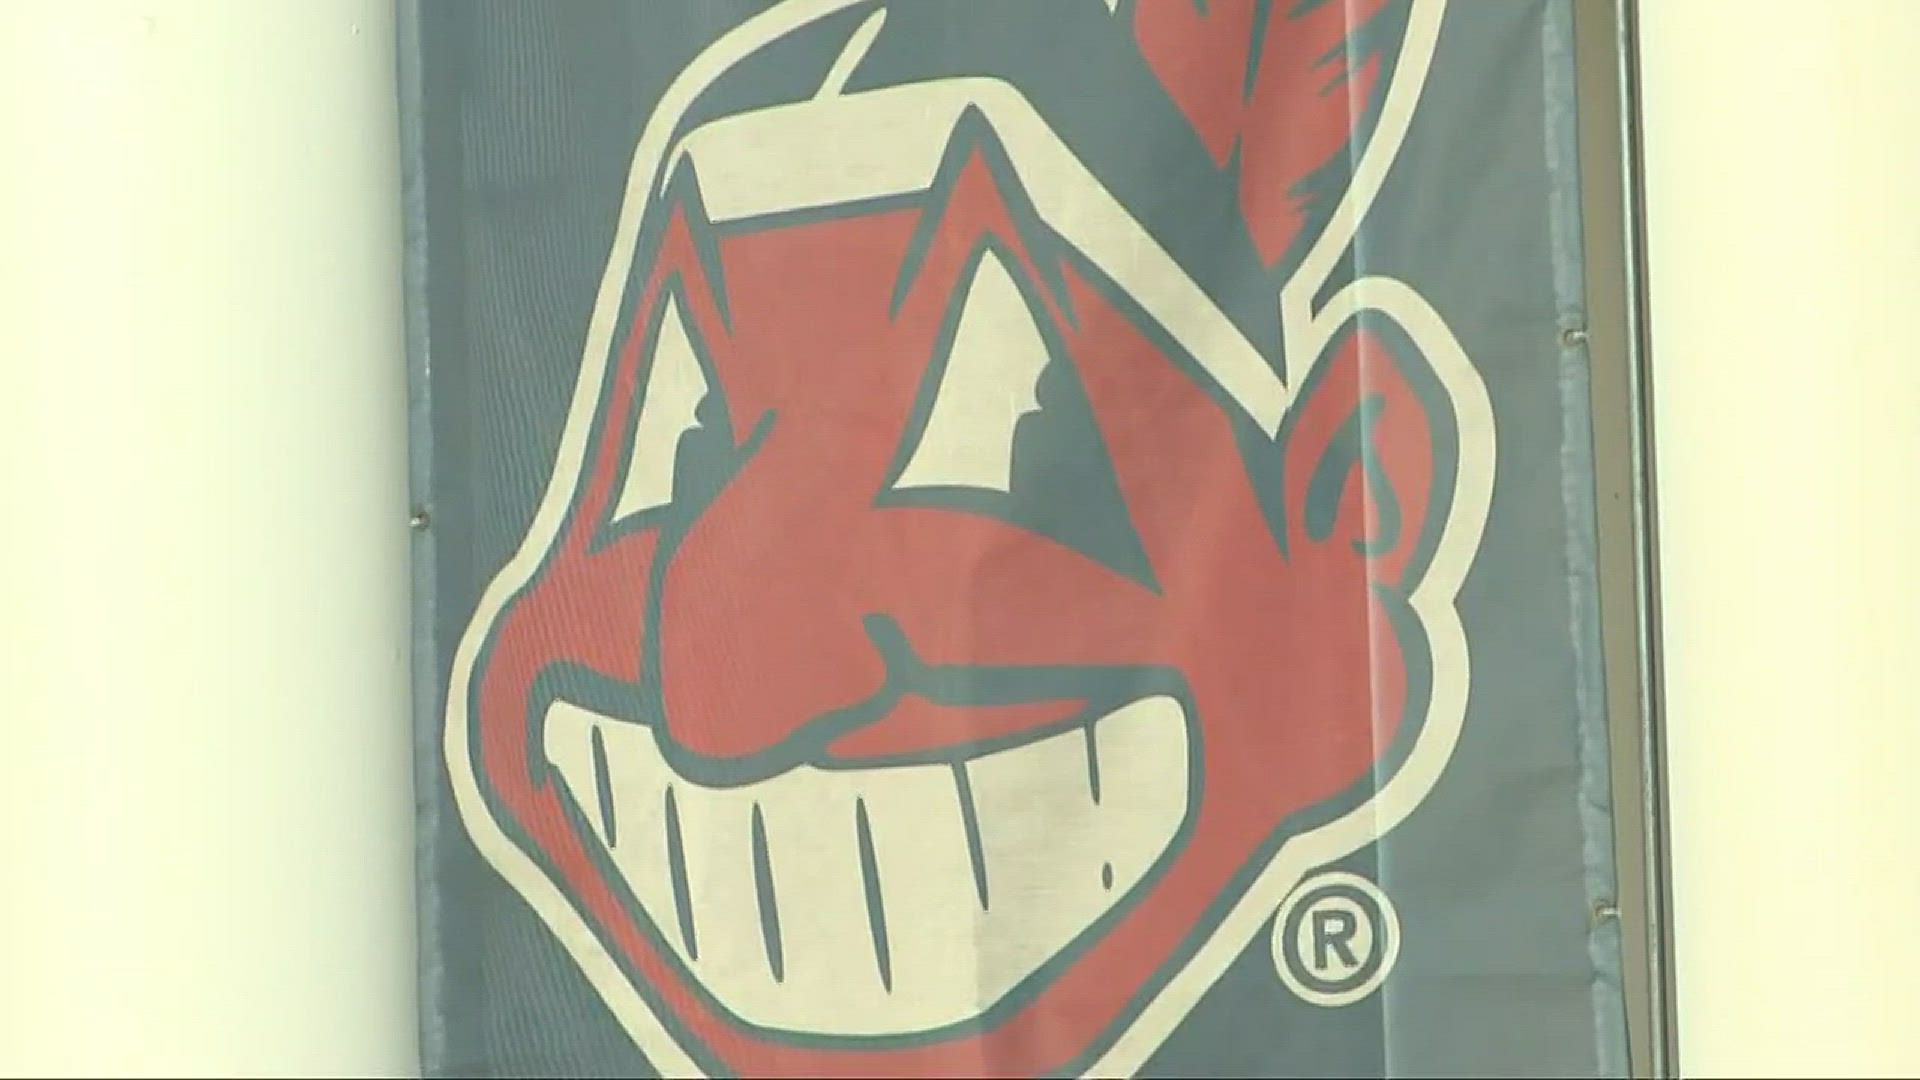 Indians are right to remove Chief Wahoo